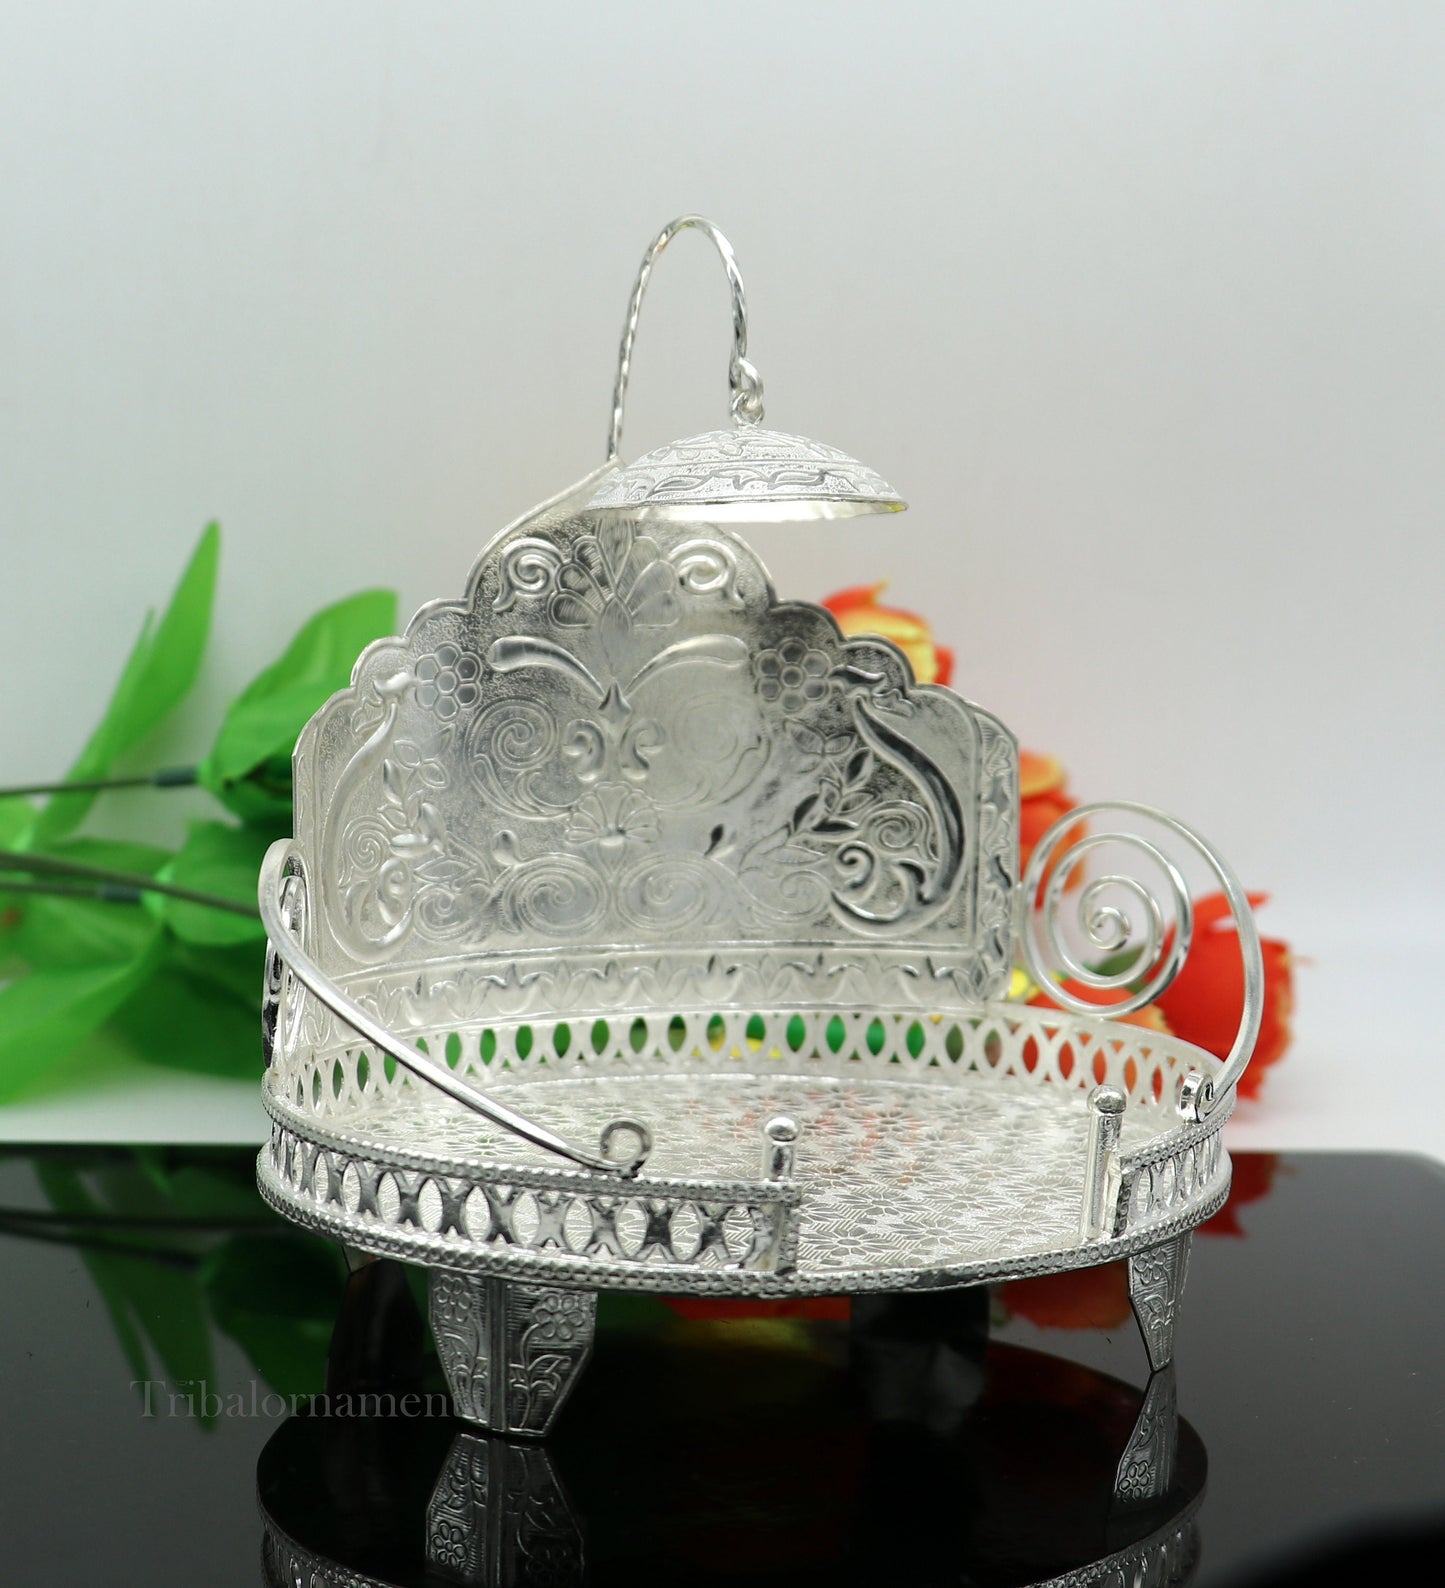 925 sterling silver handcrafted solid Sinhasan, idol god throne, god statue's stand chair, temple puja article best collectible gift su569 - TRIBAL ORNAMENTS